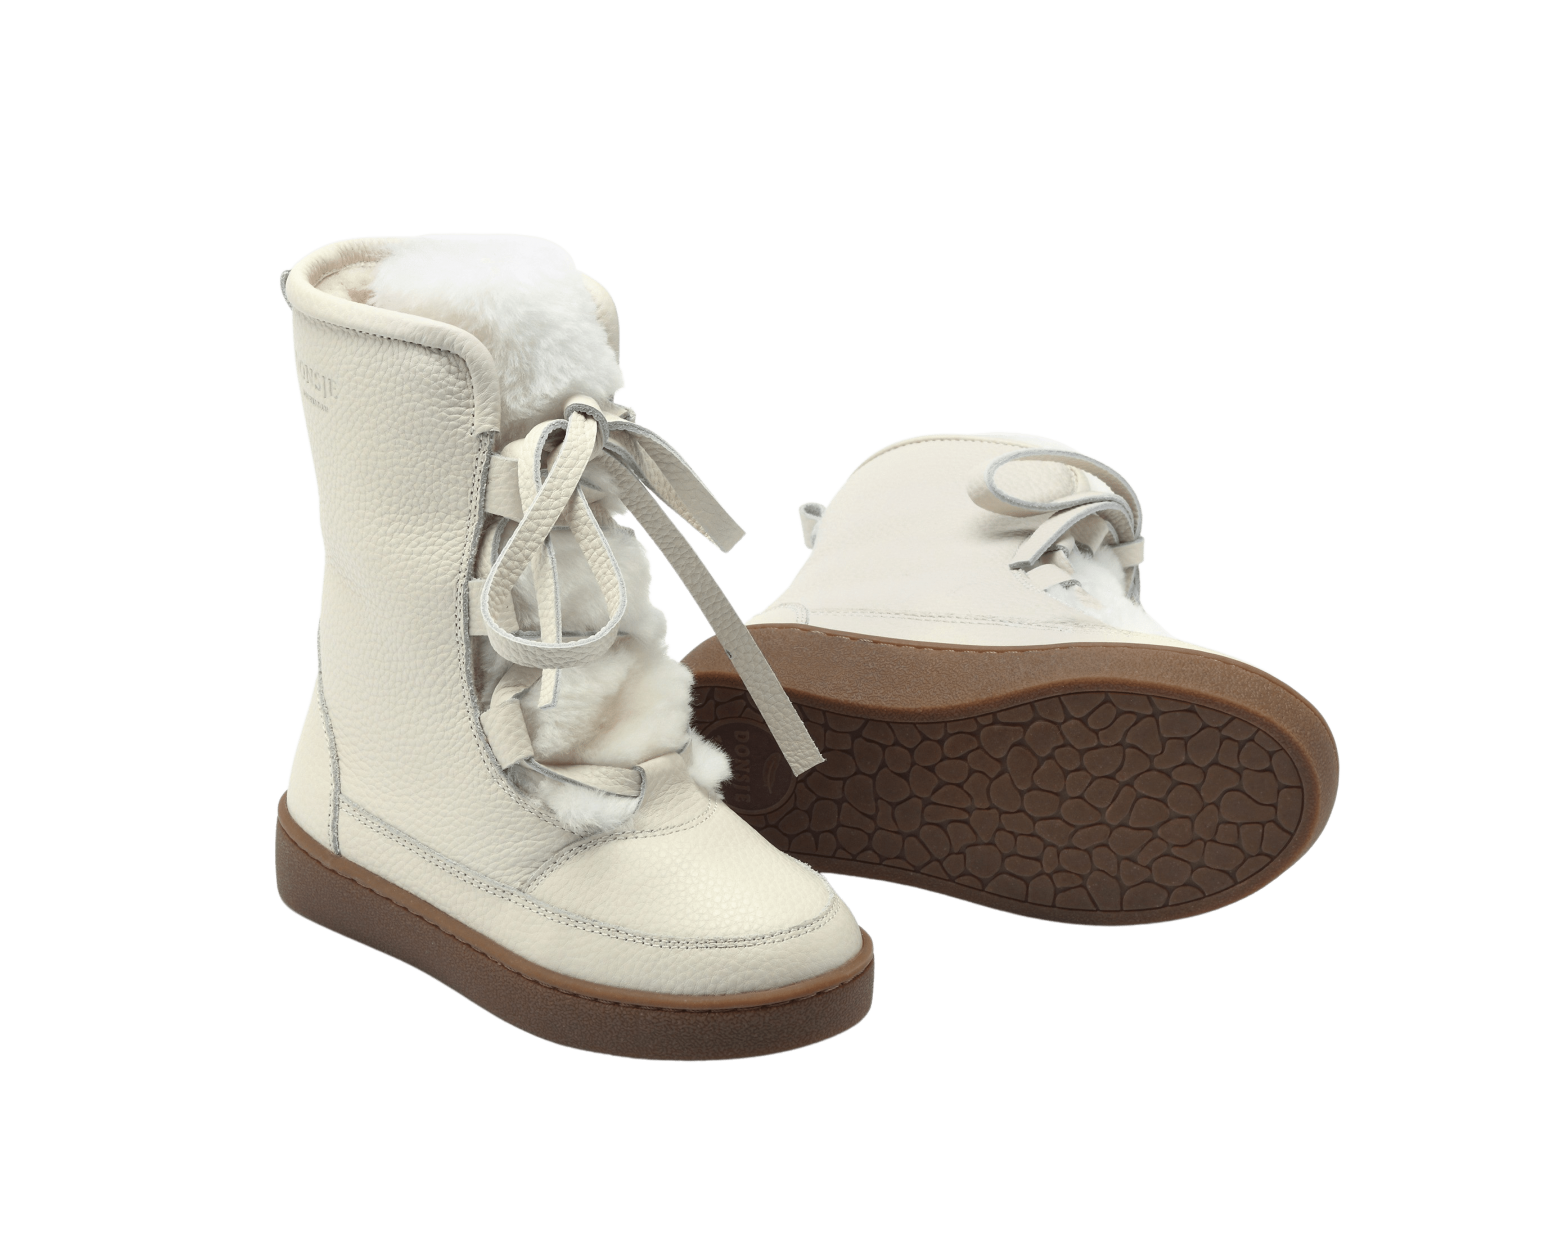 Sonny Boots | Off White Leather